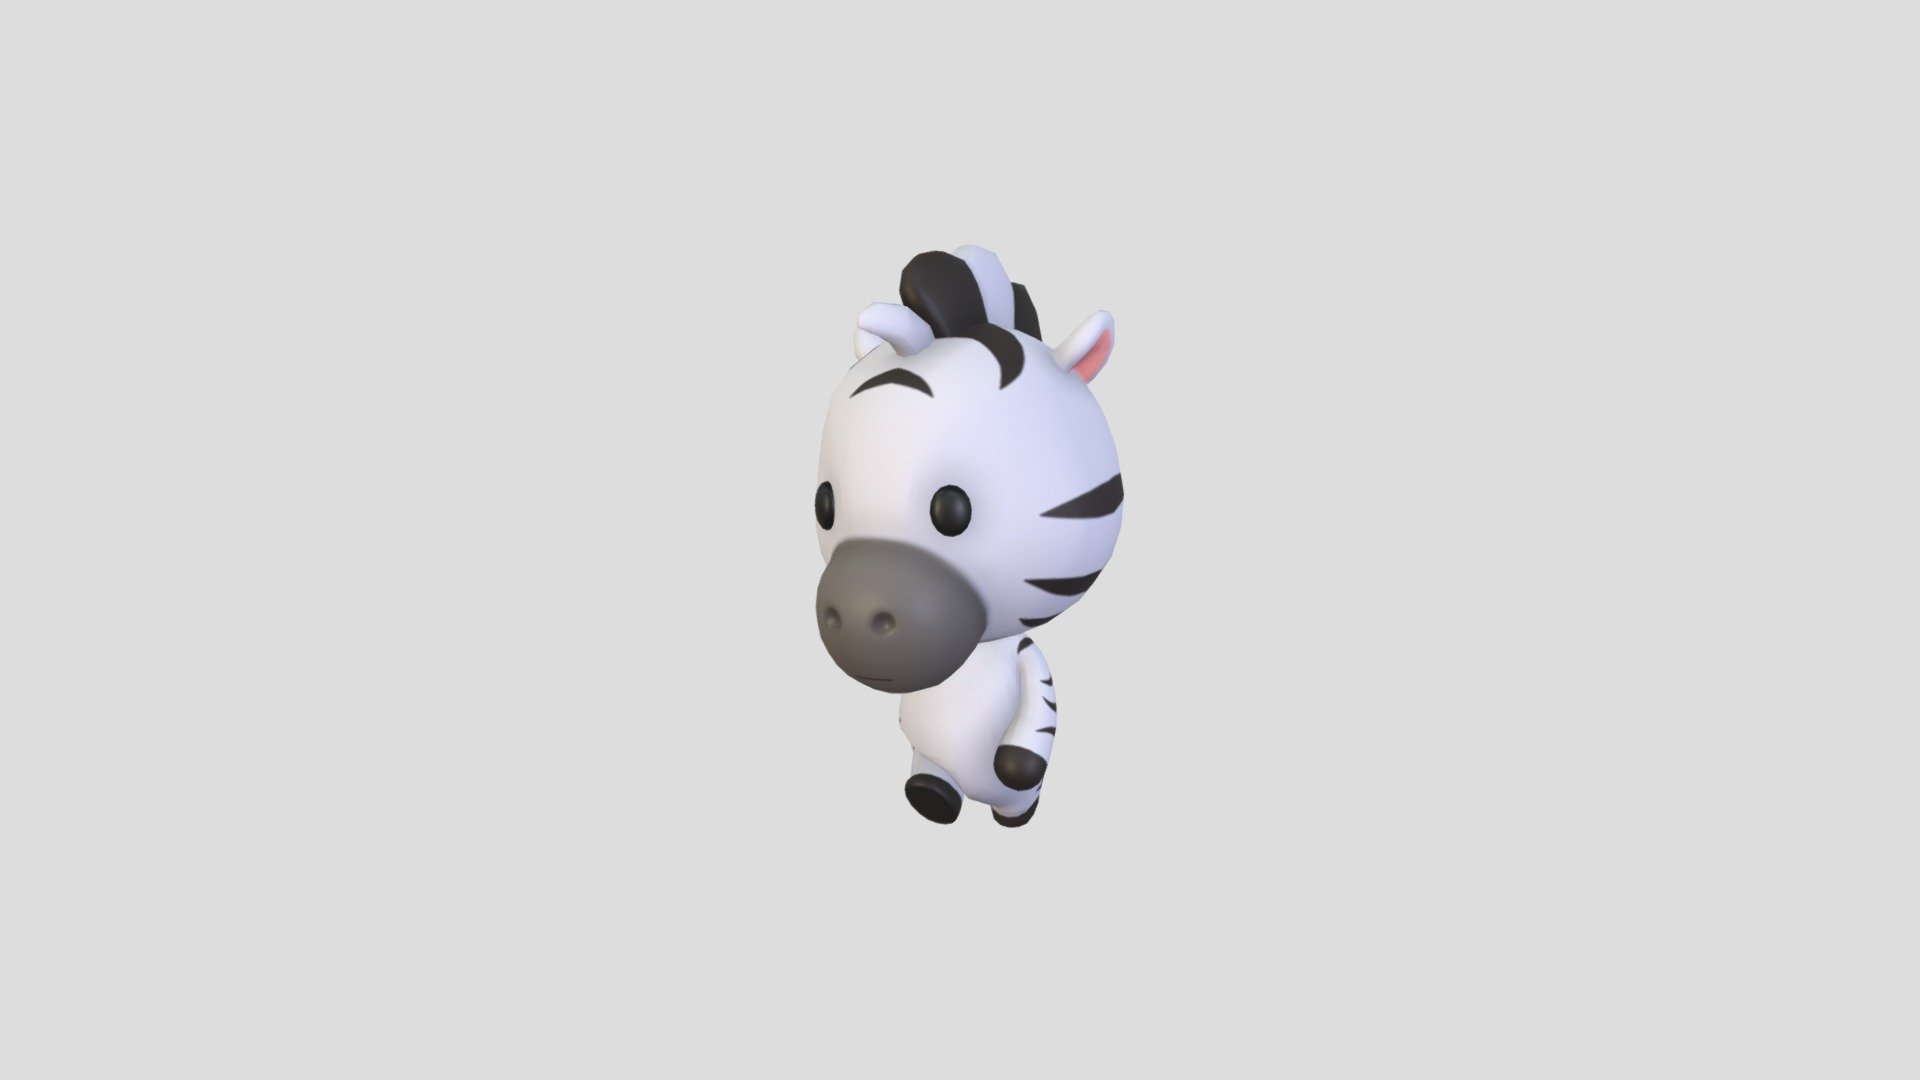 Rigged Zebra Character 3d model.      
    


File Format      
 
- 3ds max 2022  
 
- FBX  
 
- OBJ  
    


Clean topology    

Rig with CAT in 3ds Max                          

Bone and Weight skin are in fbx file       

No Facial Rig    

No Animation    

Non-overlapping unwrapped UVs        
 


PNG texture               

2048x2048                


- Base Color                        

- Normal                            

- Roughness                         



3,040 polygons                          

3,048 vertexs                          
 - Character142 Rigged Zebra - Buy Royalty Free 3D model by BaluCG 3d model